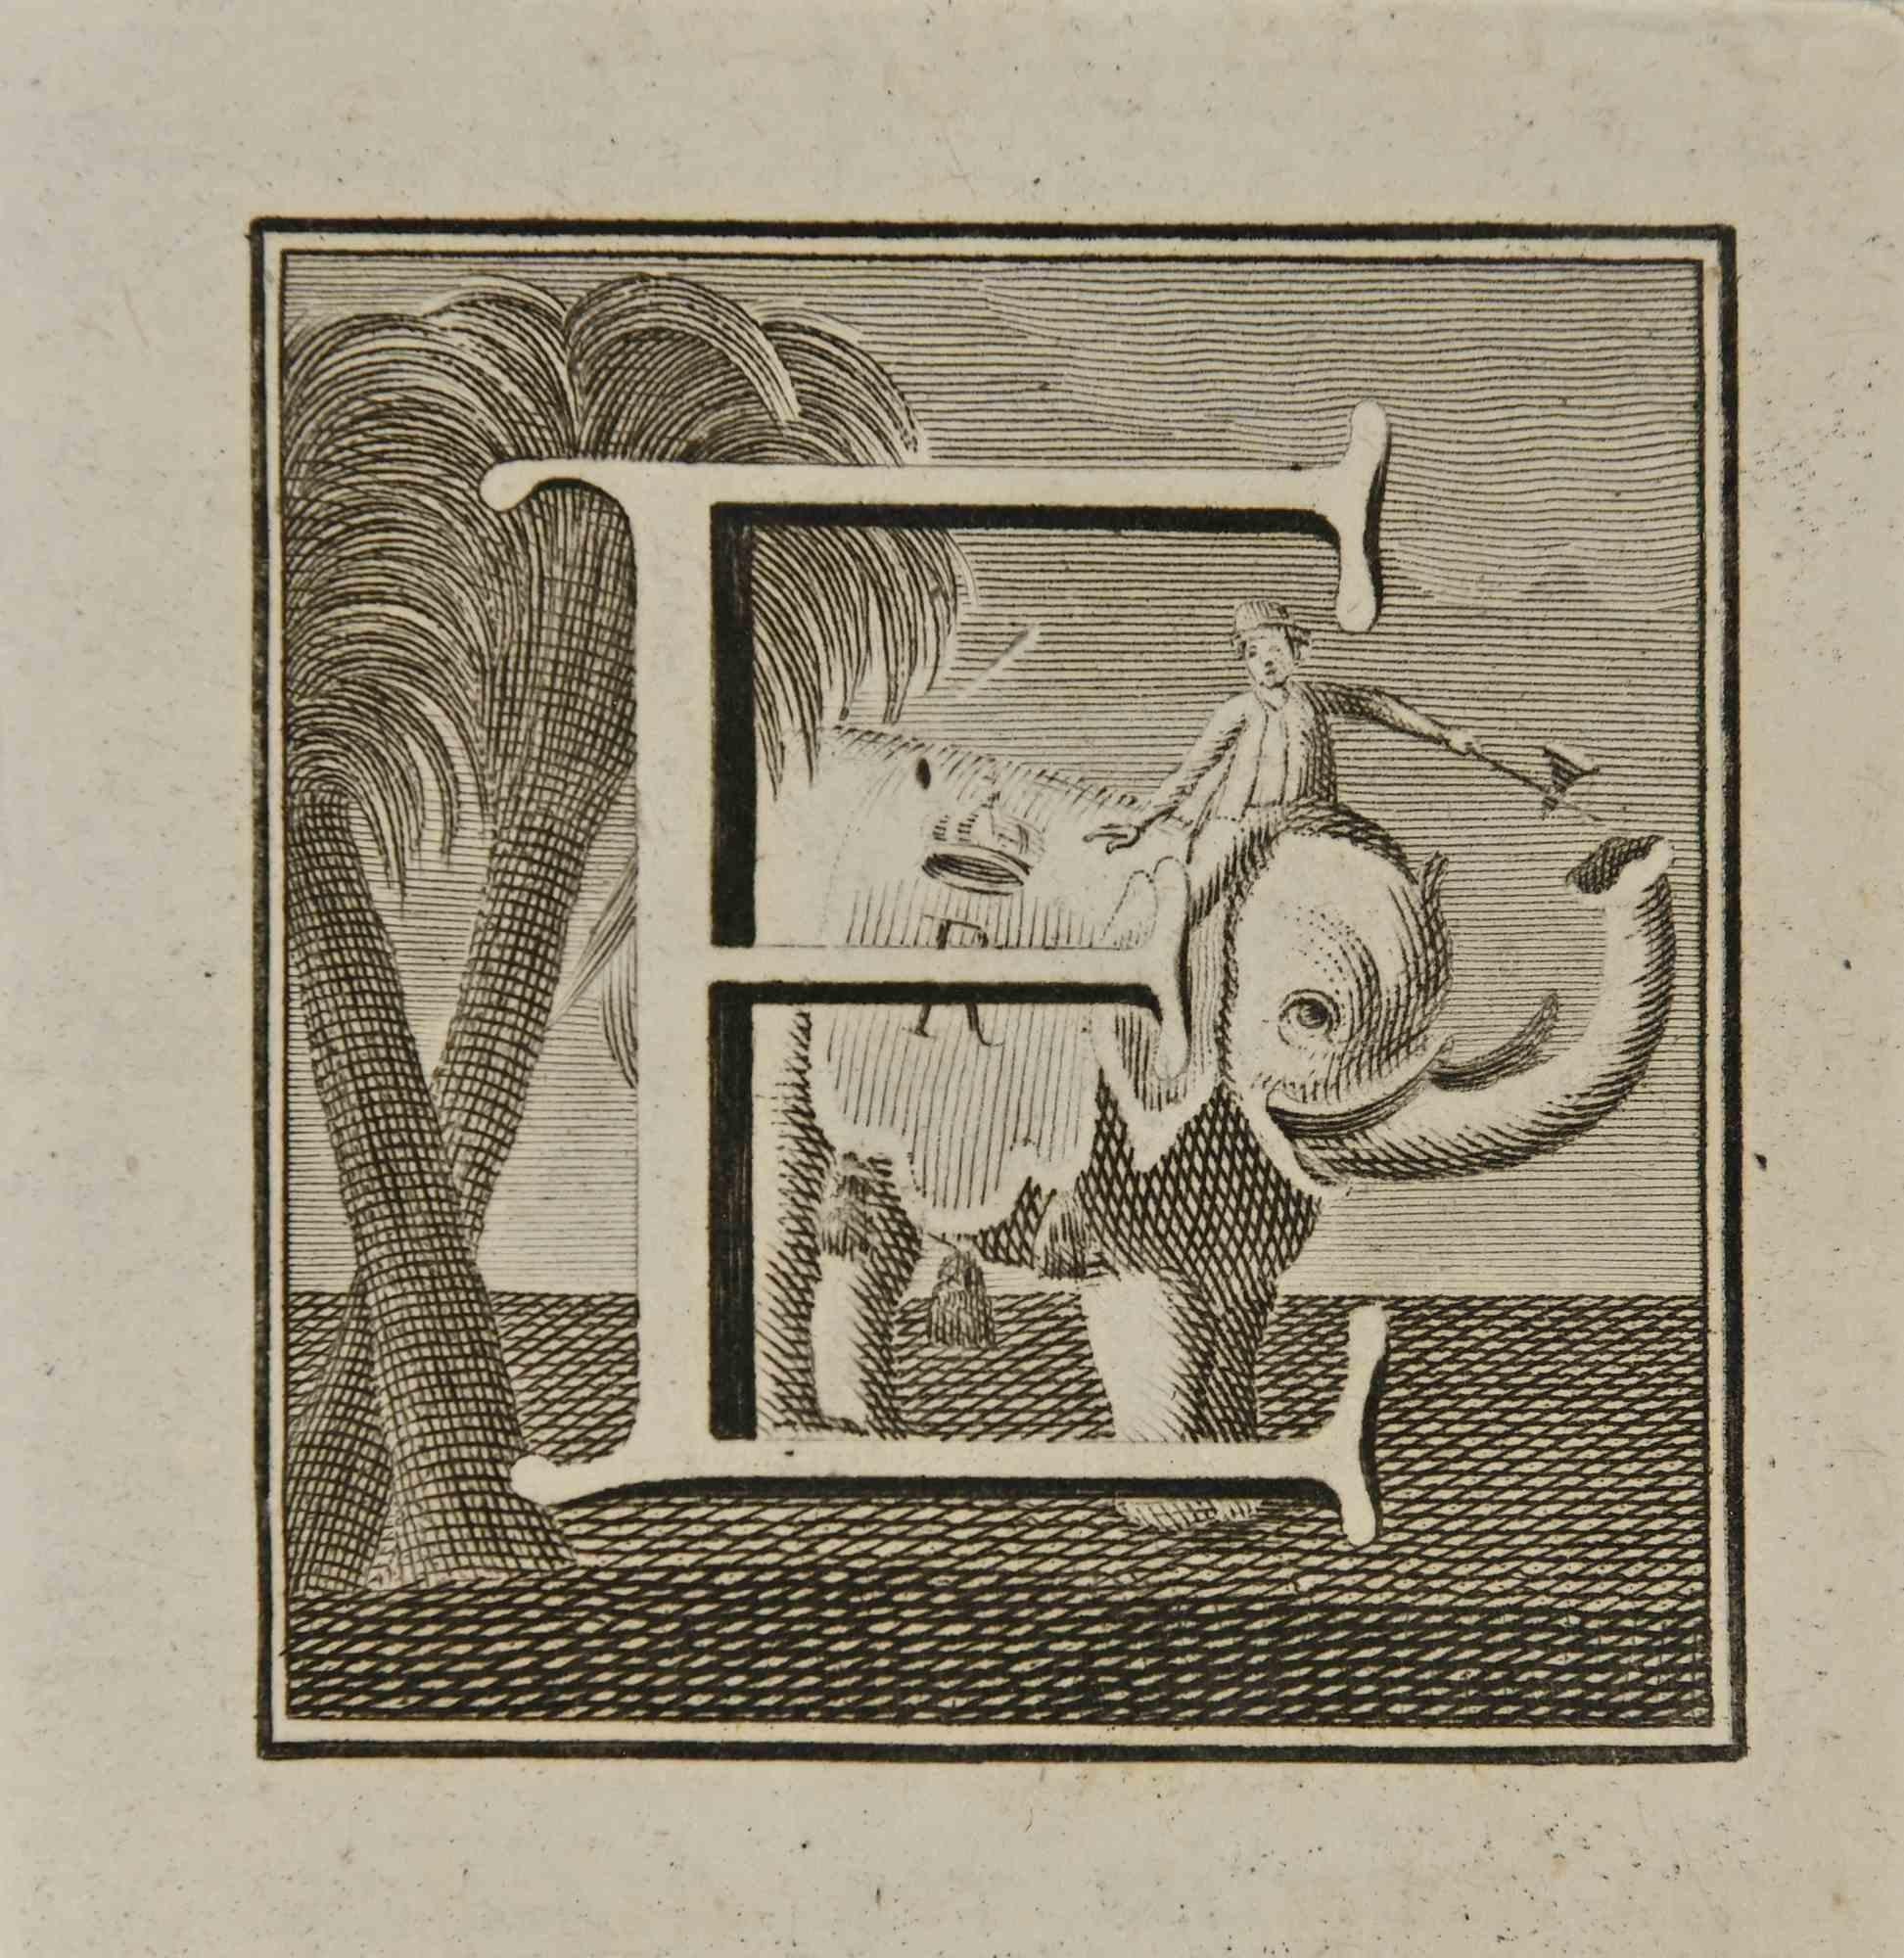 Letter of the Alphabet E,  from the series "Antiquities of Herculaneum", is an etching on paper realized by Luigi Vanvitelli in the 18th century.

Good conditions.

The etching belongs to the print suite “Antiquities of Herculaneum Exposed”